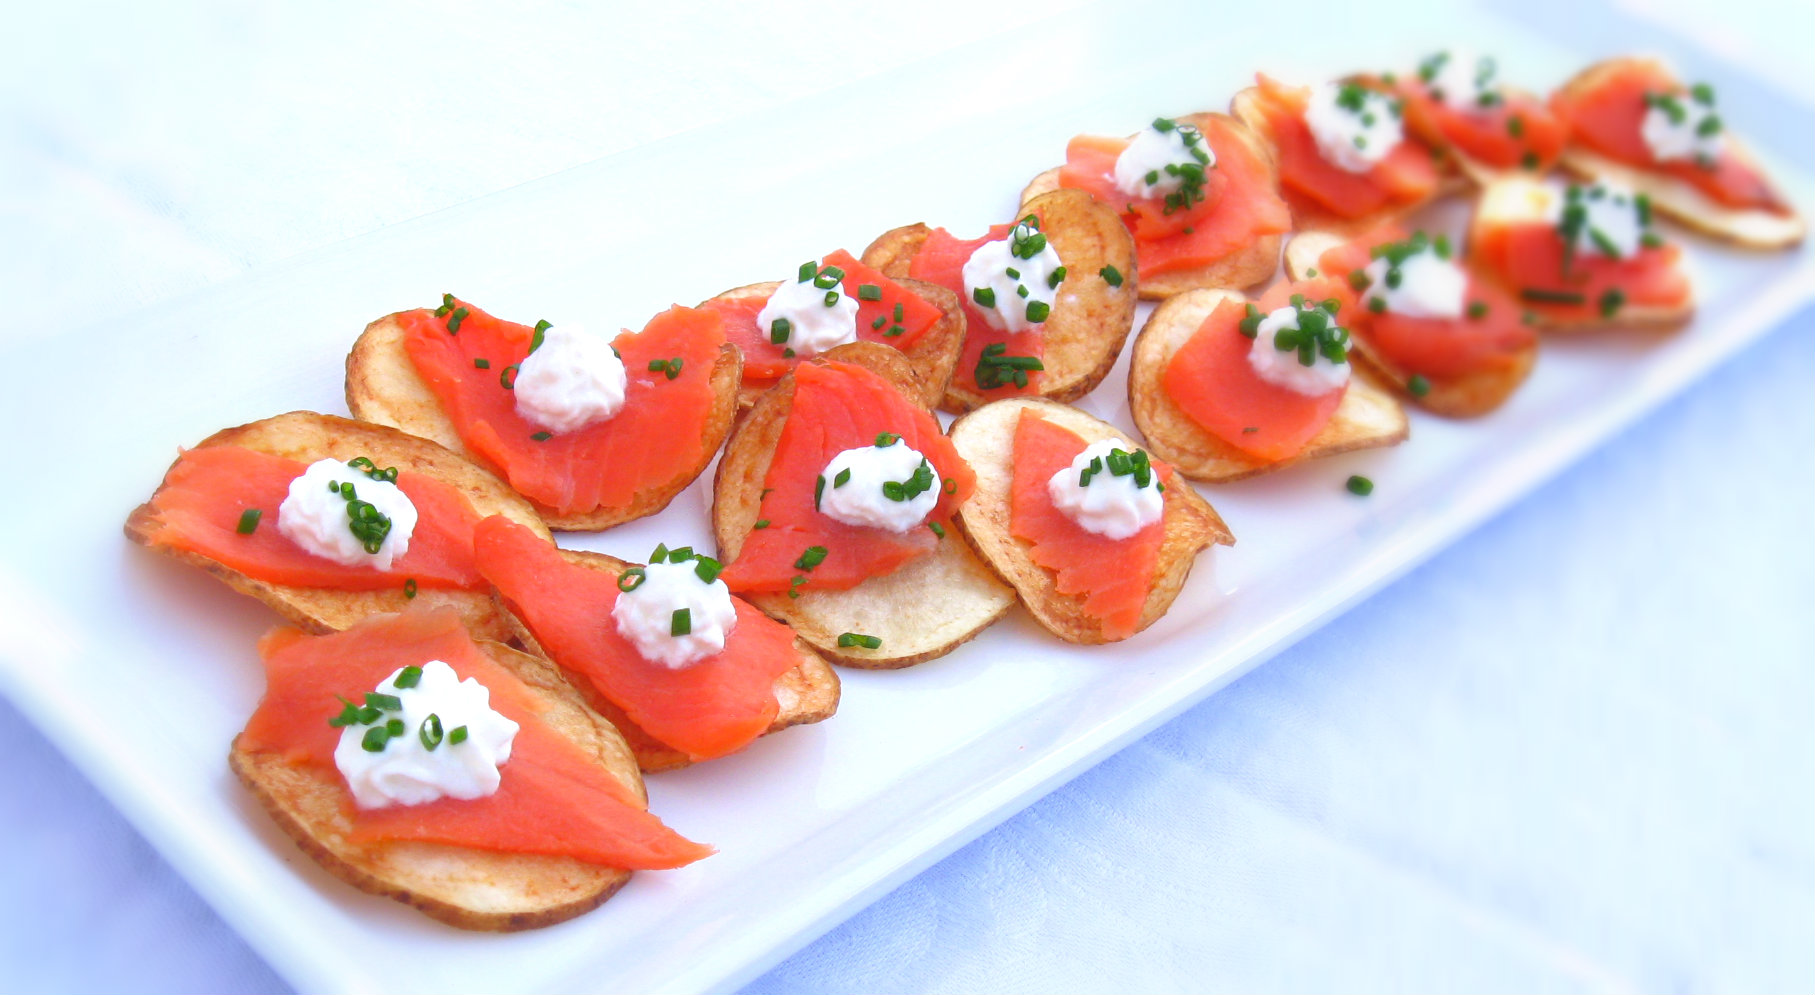 Chips ‘n’ Dip with Smoked Salmon